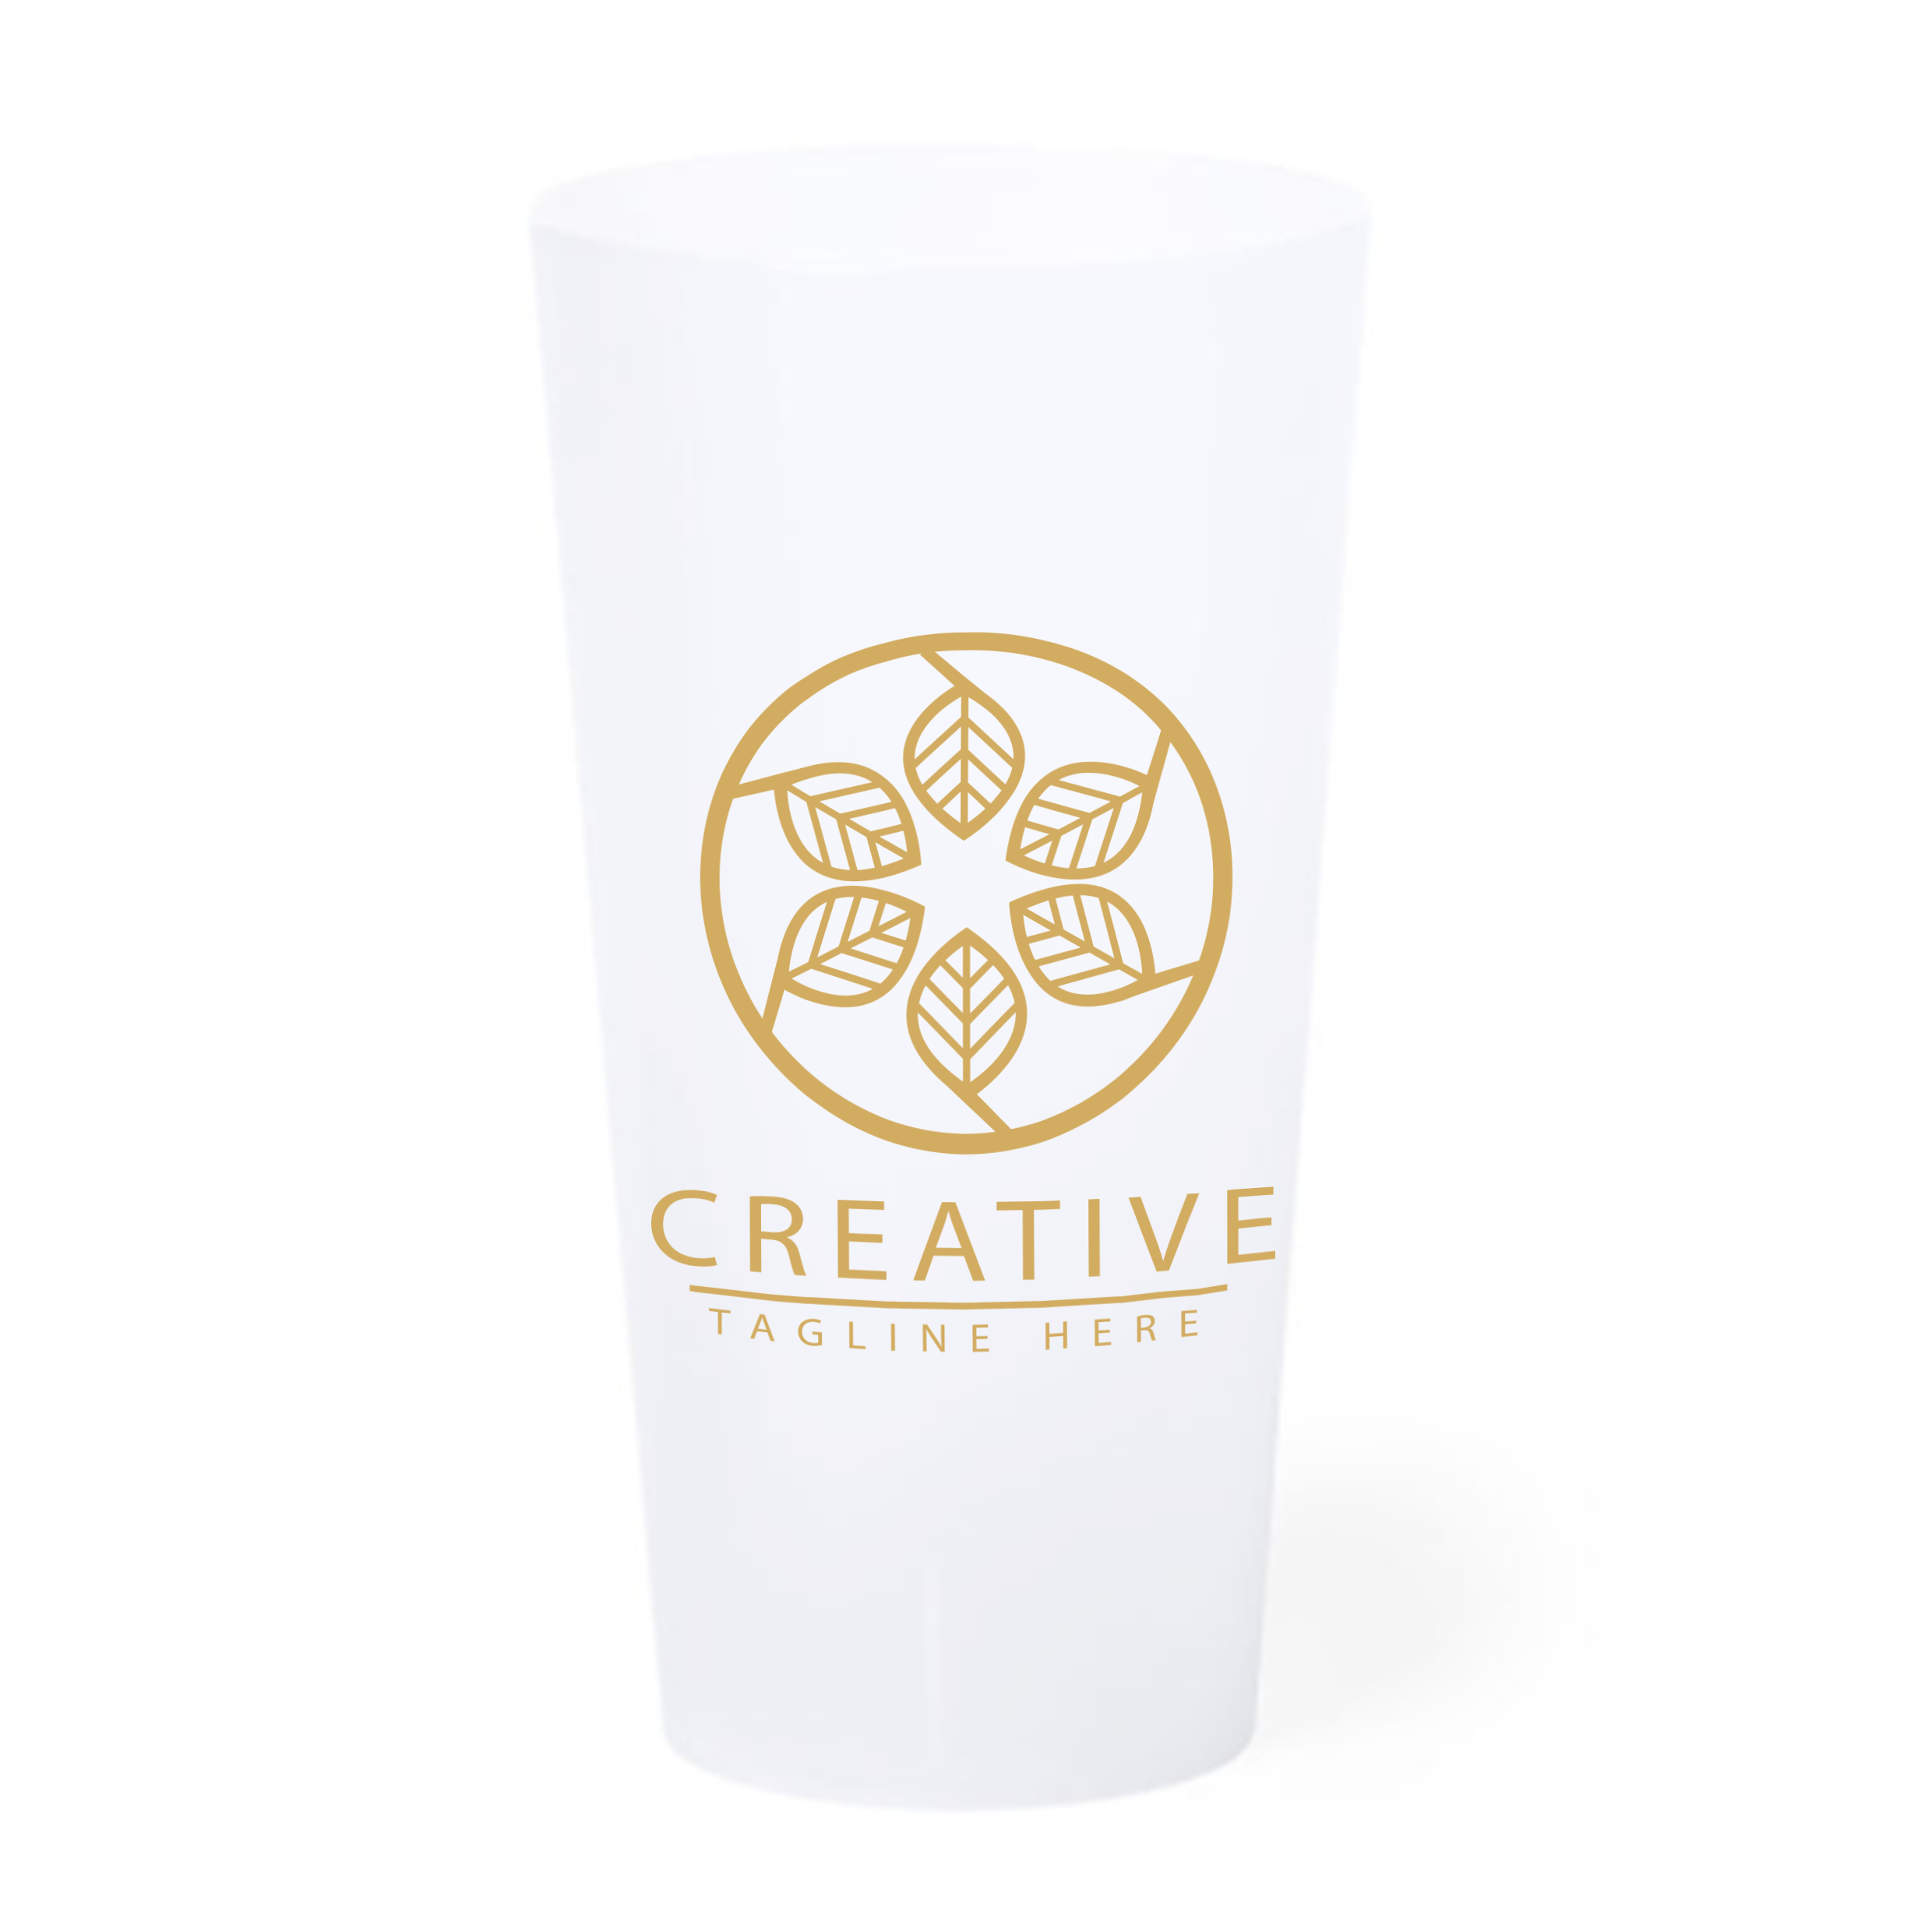 Eco-Friendly Frosted 400ml PP Cup - Groombridge